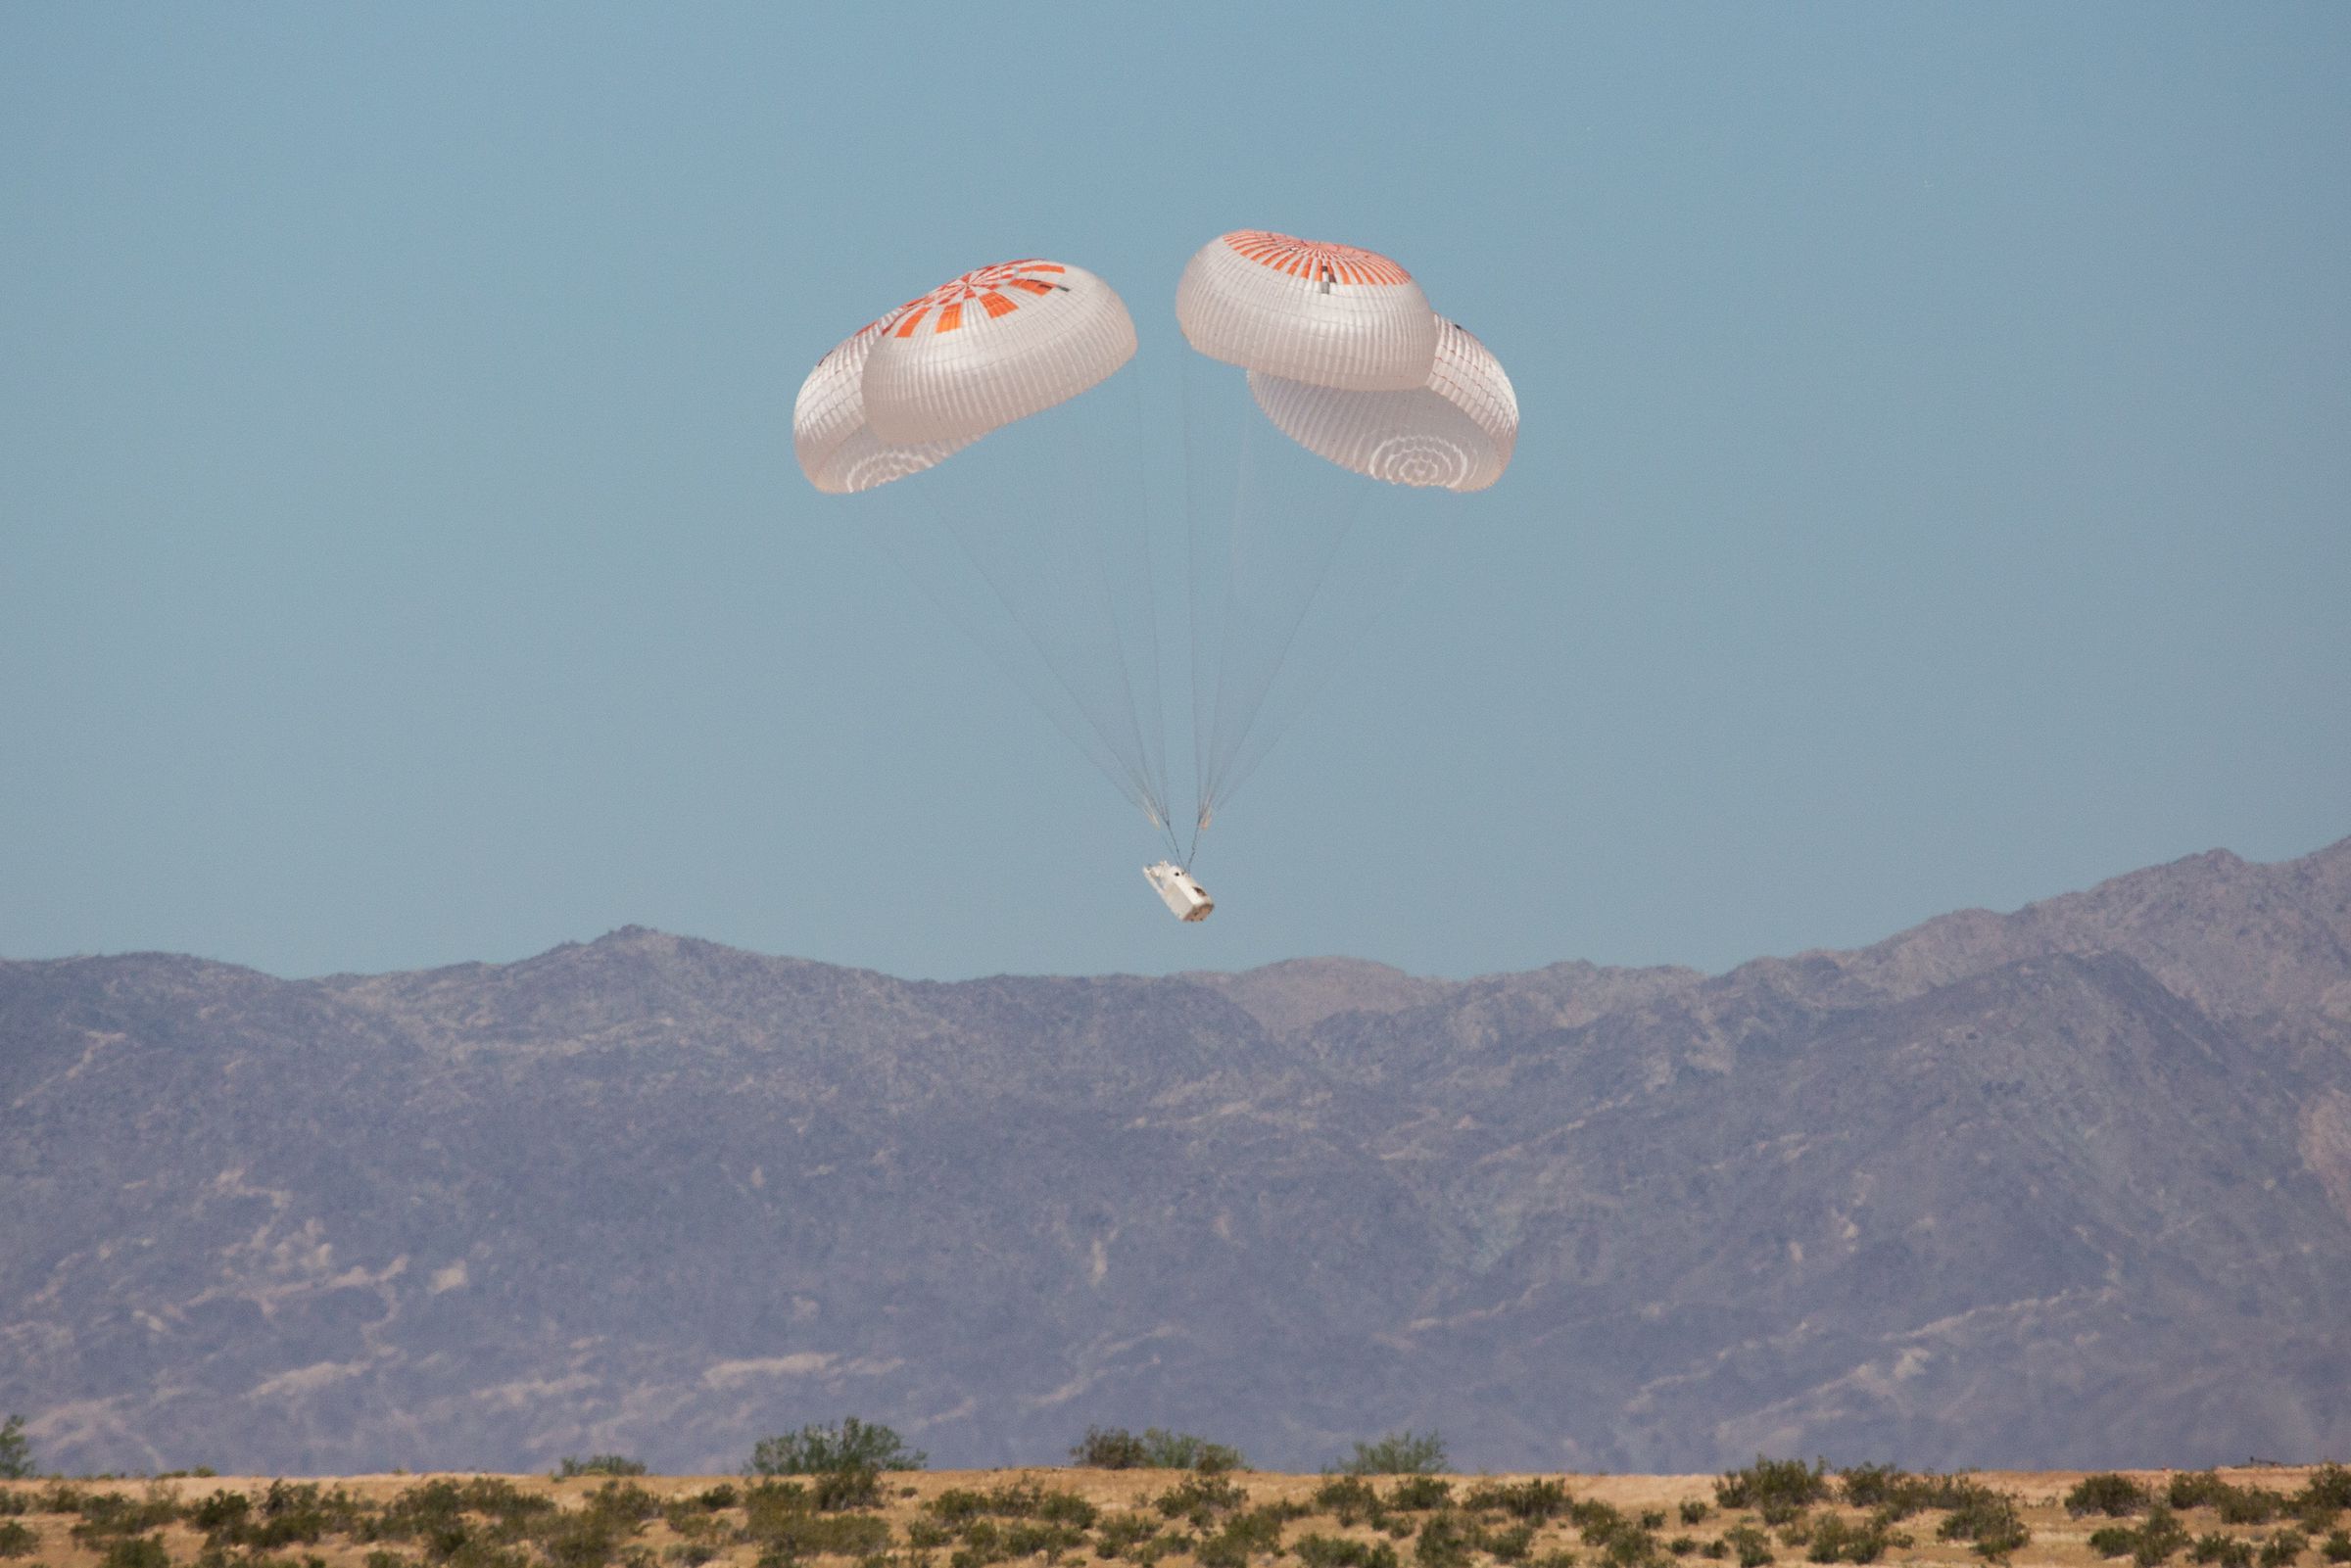 A test of the parachute system the Crew Dragon uses to land the vehicle back on Earth.